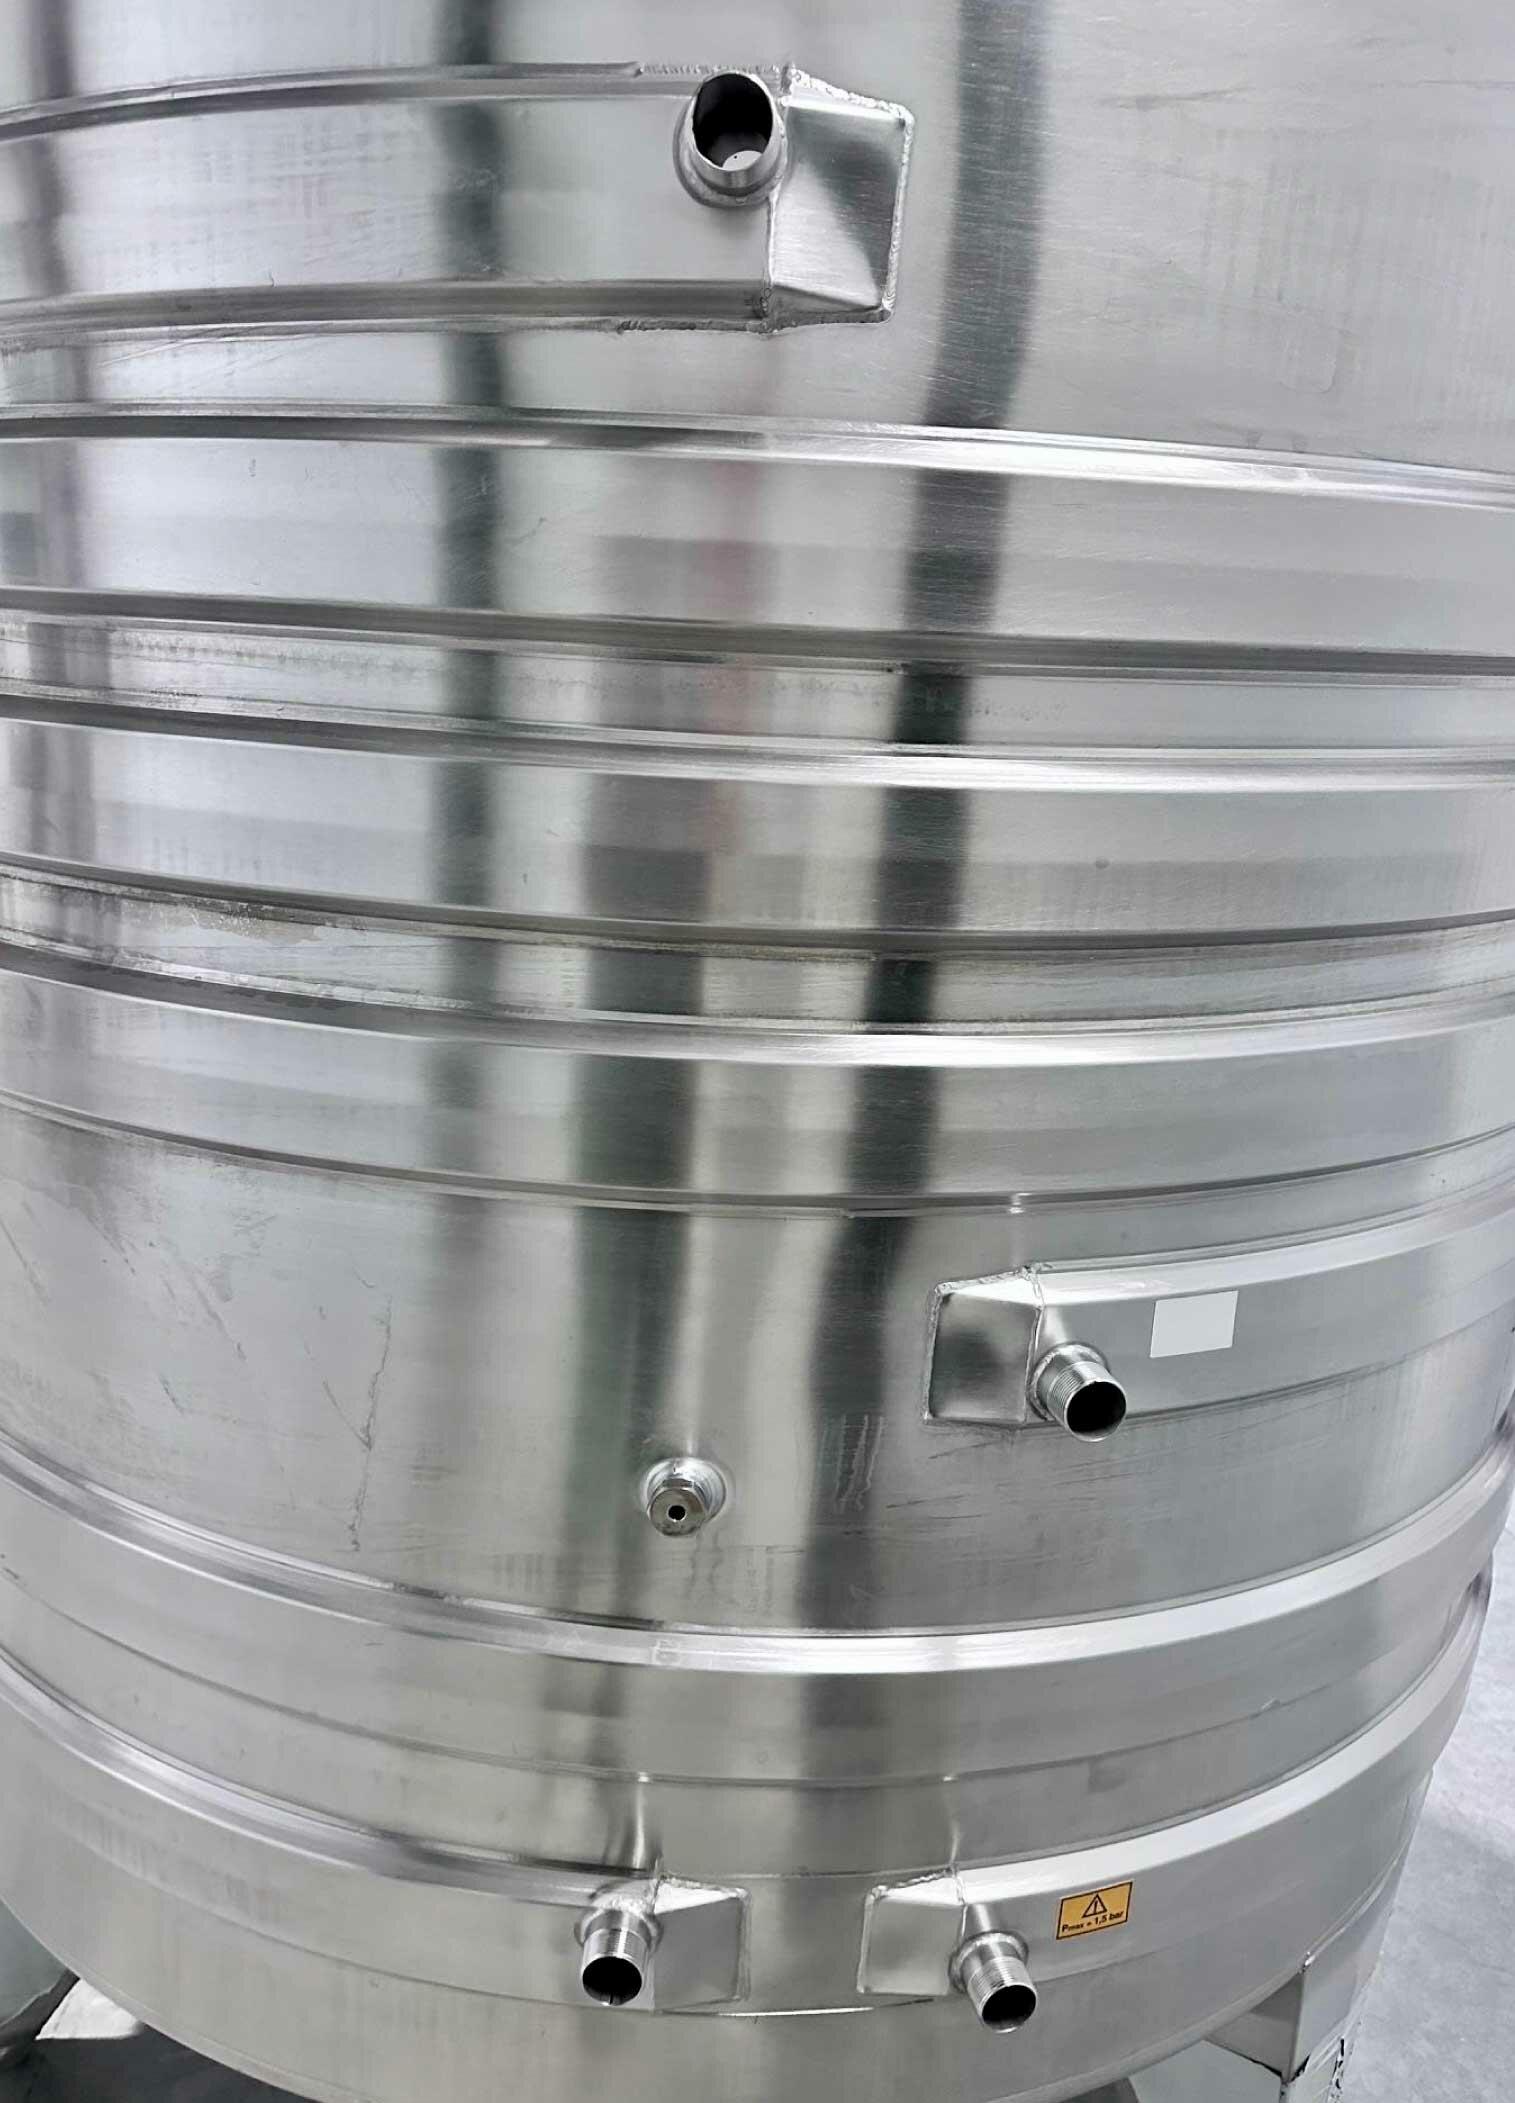 304 stainless steel tank - Cooling coil - STOIPSER4300